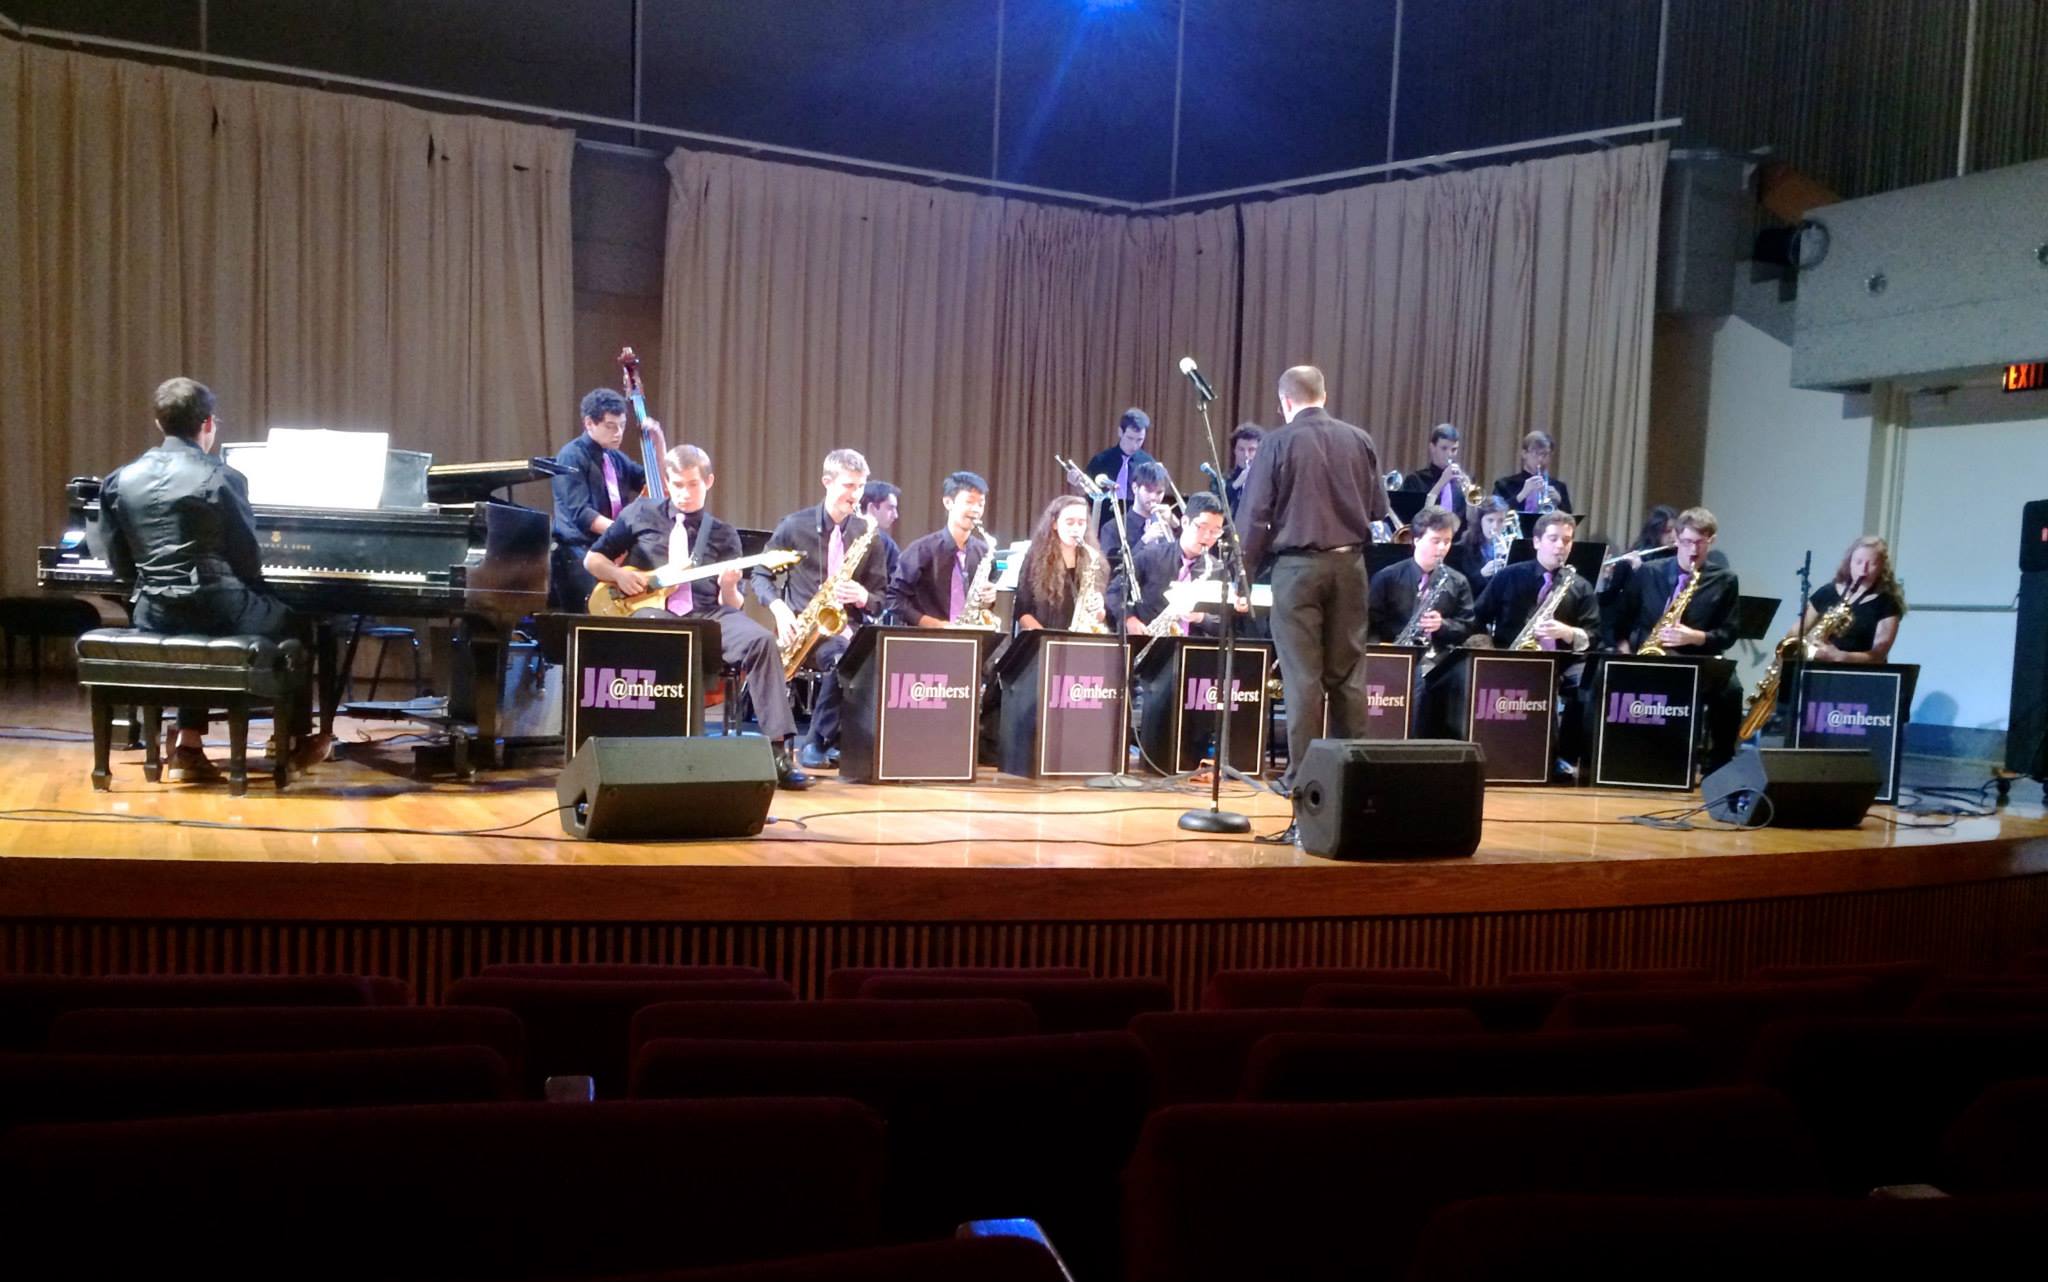 Lucas Lebovitz ’15, along with the Amherst College Jazz Ensemble 